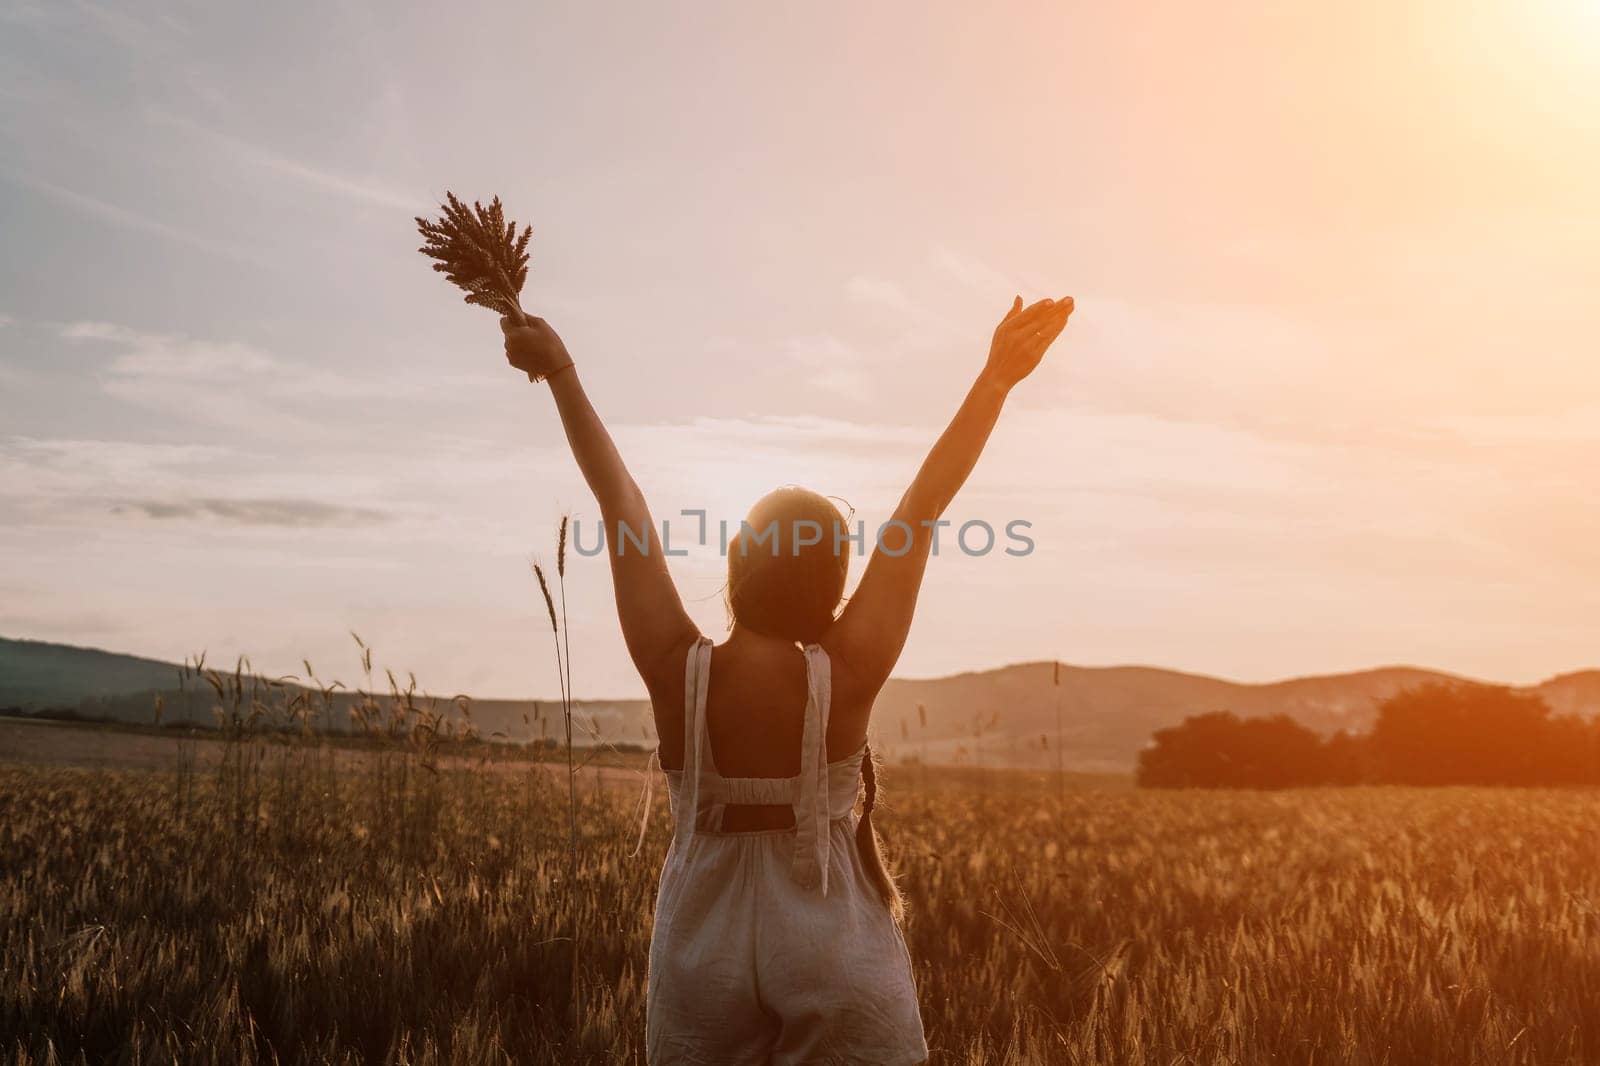 A woman is holding a bunch of wheat in her arms. The wheat is dry and brown, and the woman is wearing a white dress. The scene is set in a field, and the woman is posing for a photo